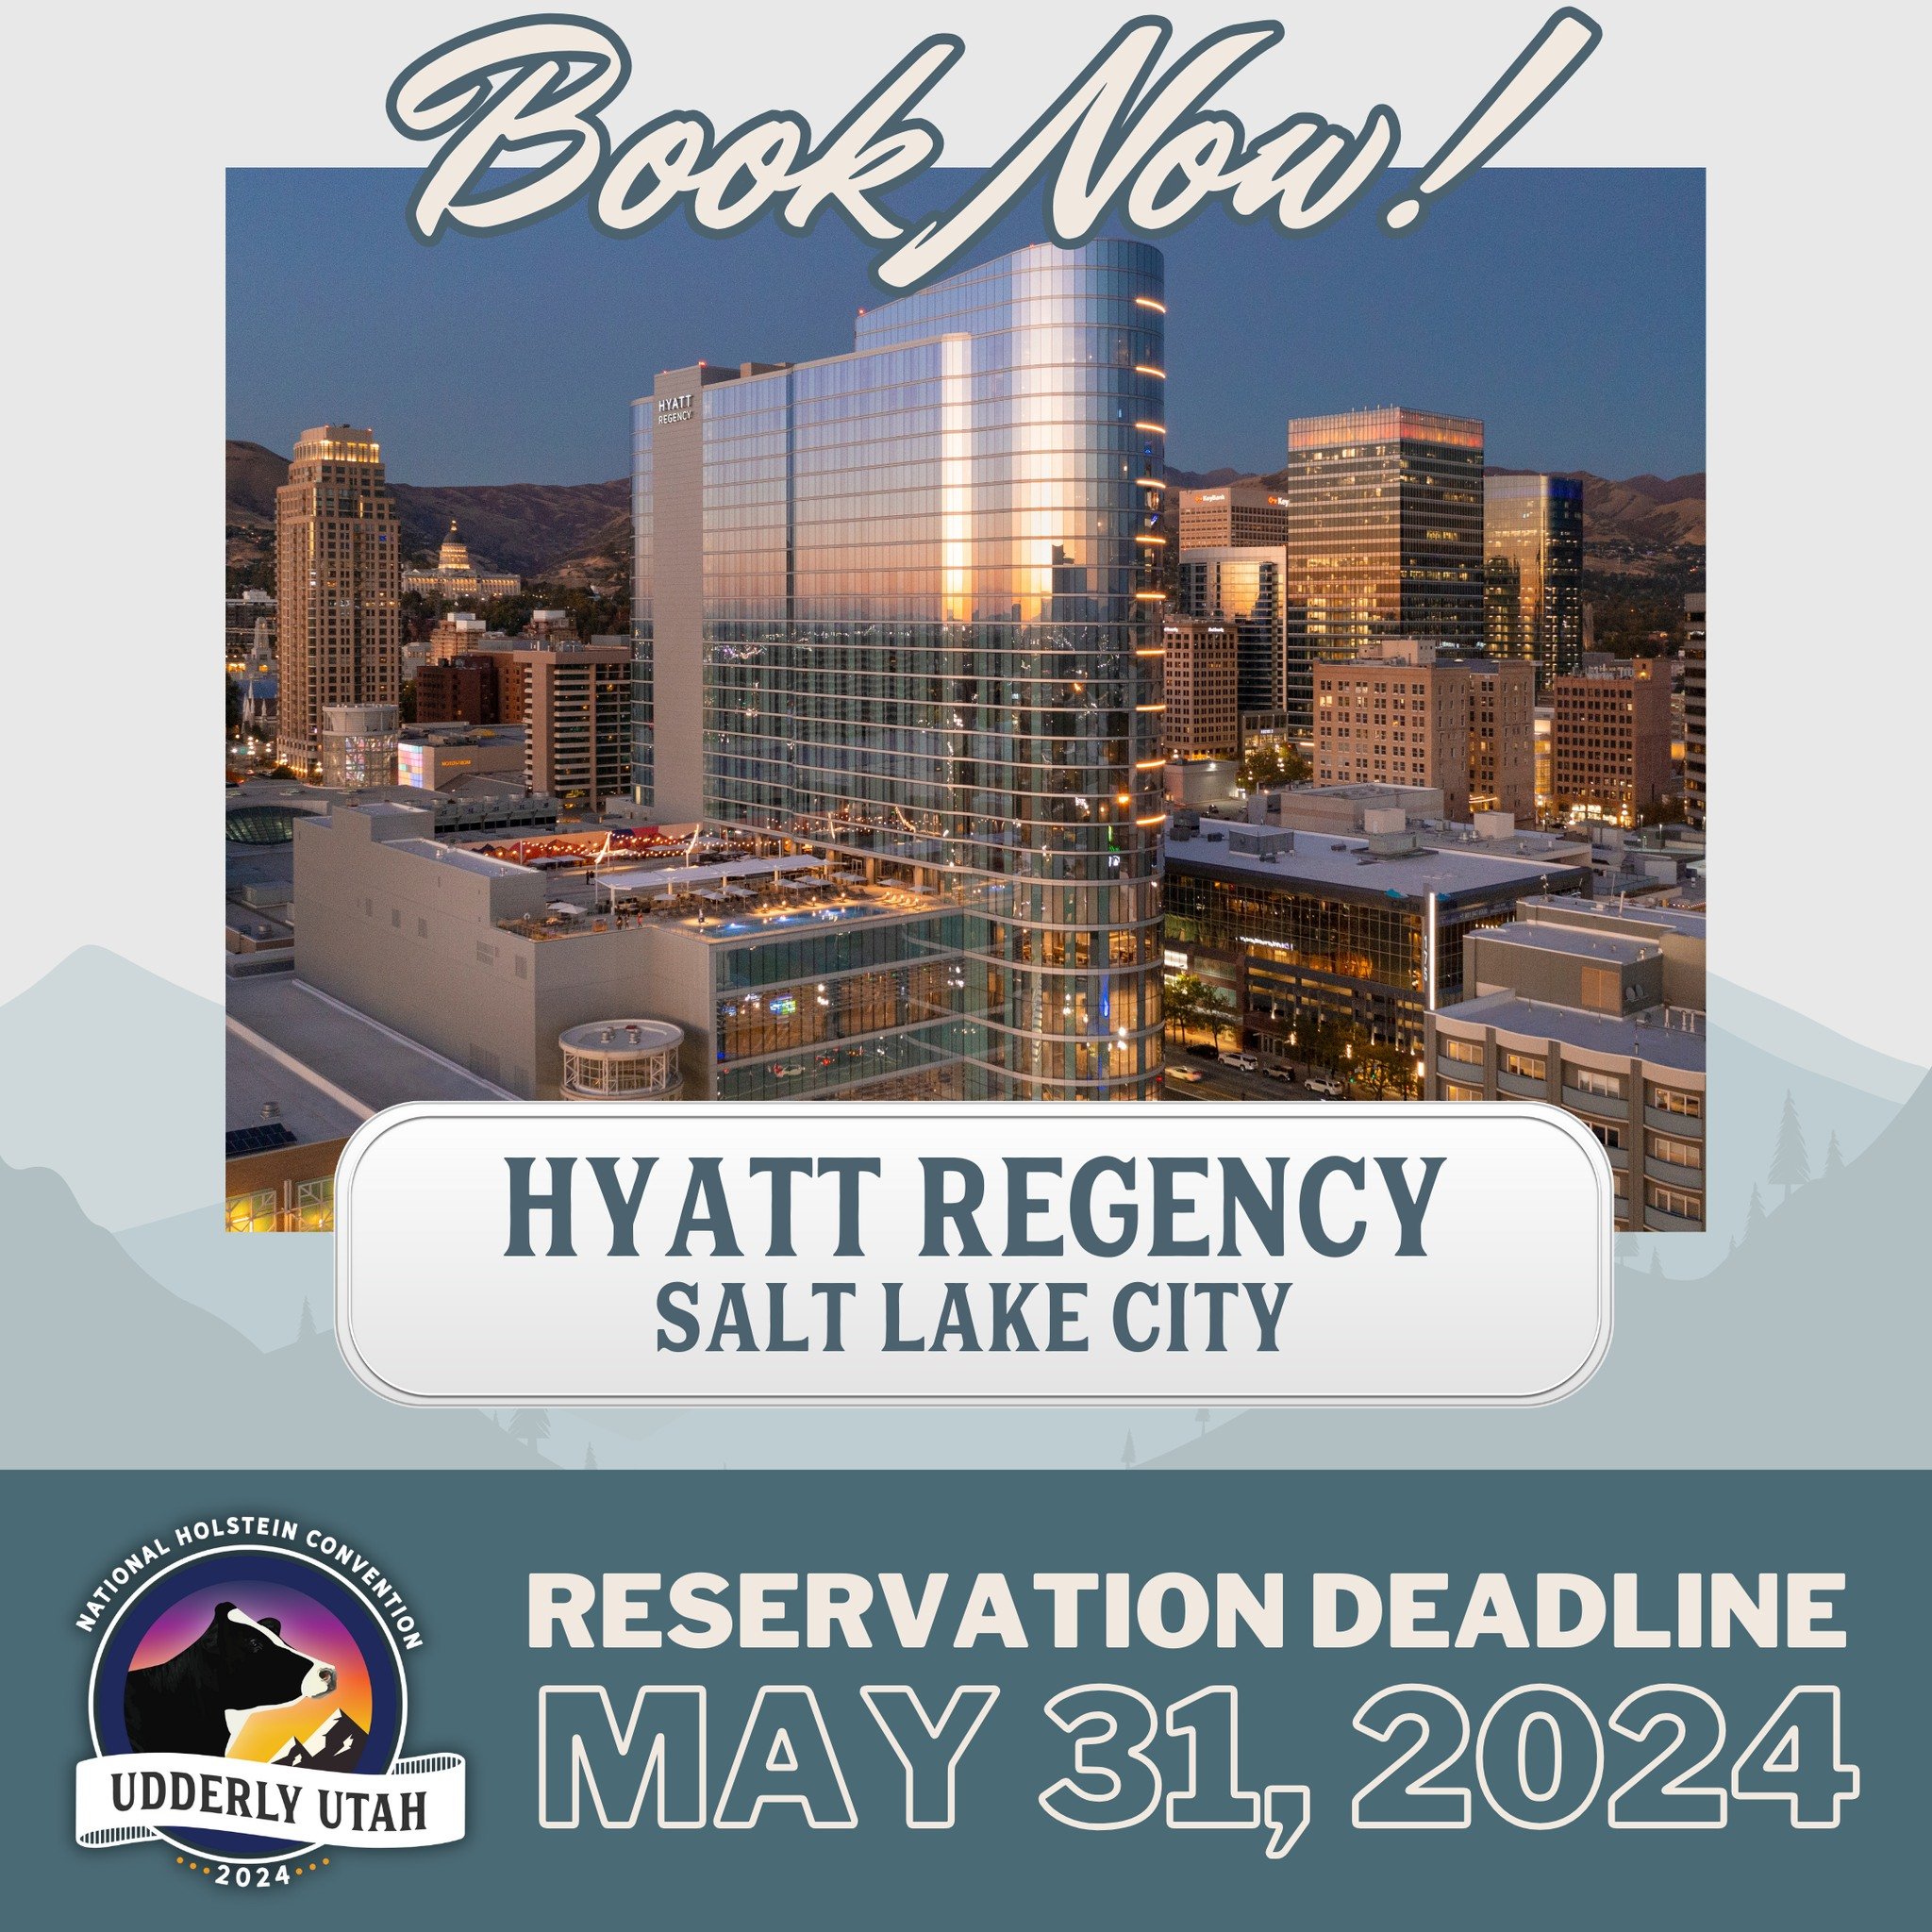 Have you booked your stay at the National Holstein Convention hotel? The reservation deadline is fast approaching!
 
📅 Deadline: May 31, 2024
🔗 Click the link in our bio to reserve your room or find out more. Availability won't last, so make sure t